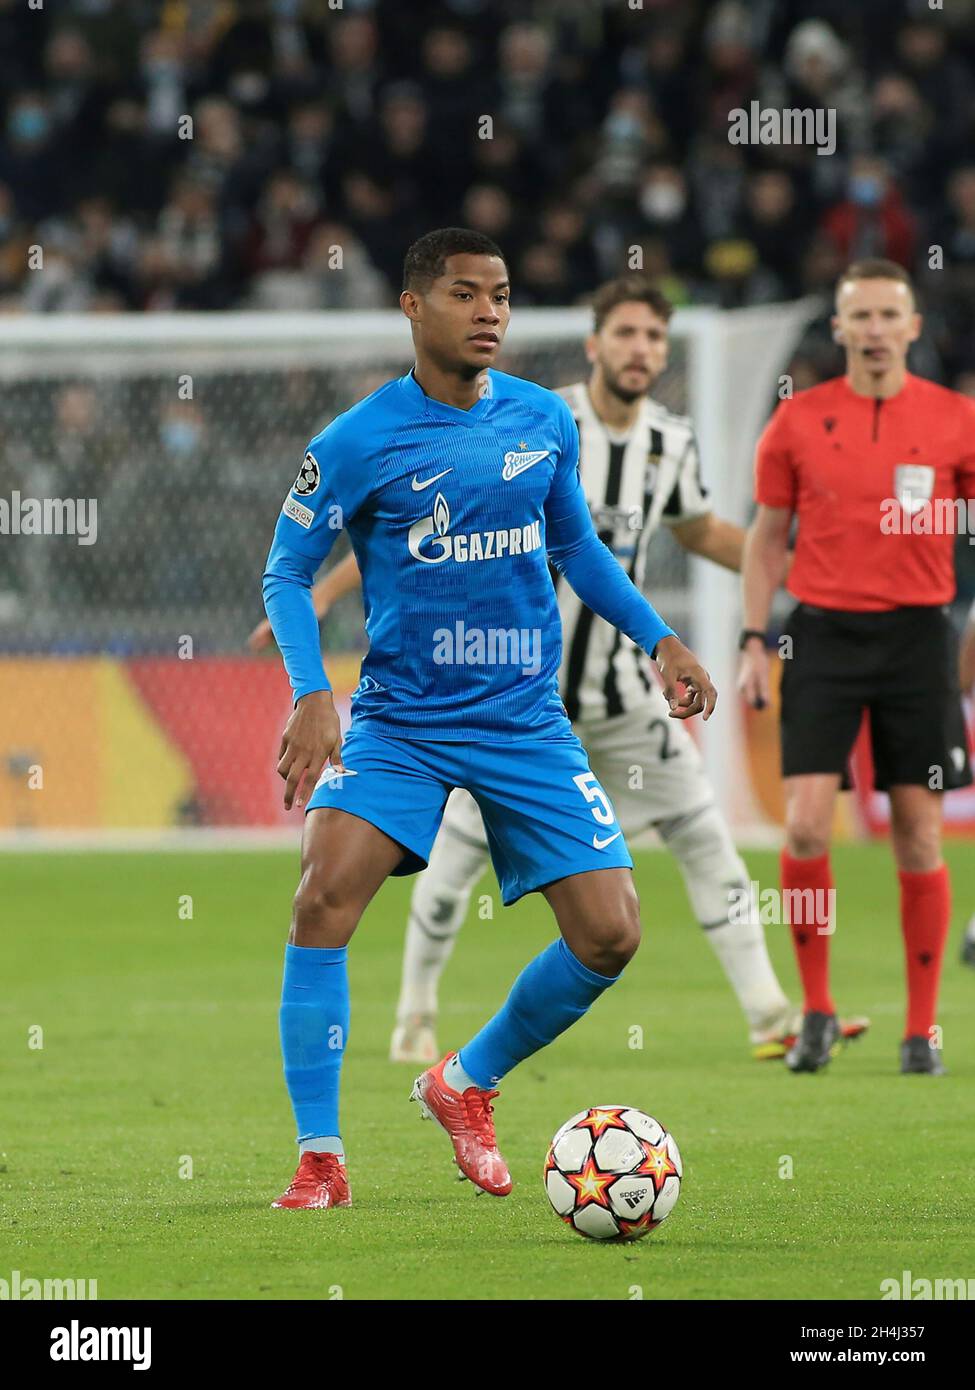 Turin, Italy. 02nd Nov, 2021. Wilmar Barrios (Zenit St. Petersburg) controlling the ball during Juventus FC vs Zenit St. Petersburg, UEFA Champions League football match in Turin, Italy, November 02 2021 Credit: Independent Photo Agency/Alamy Live News Stock Photo